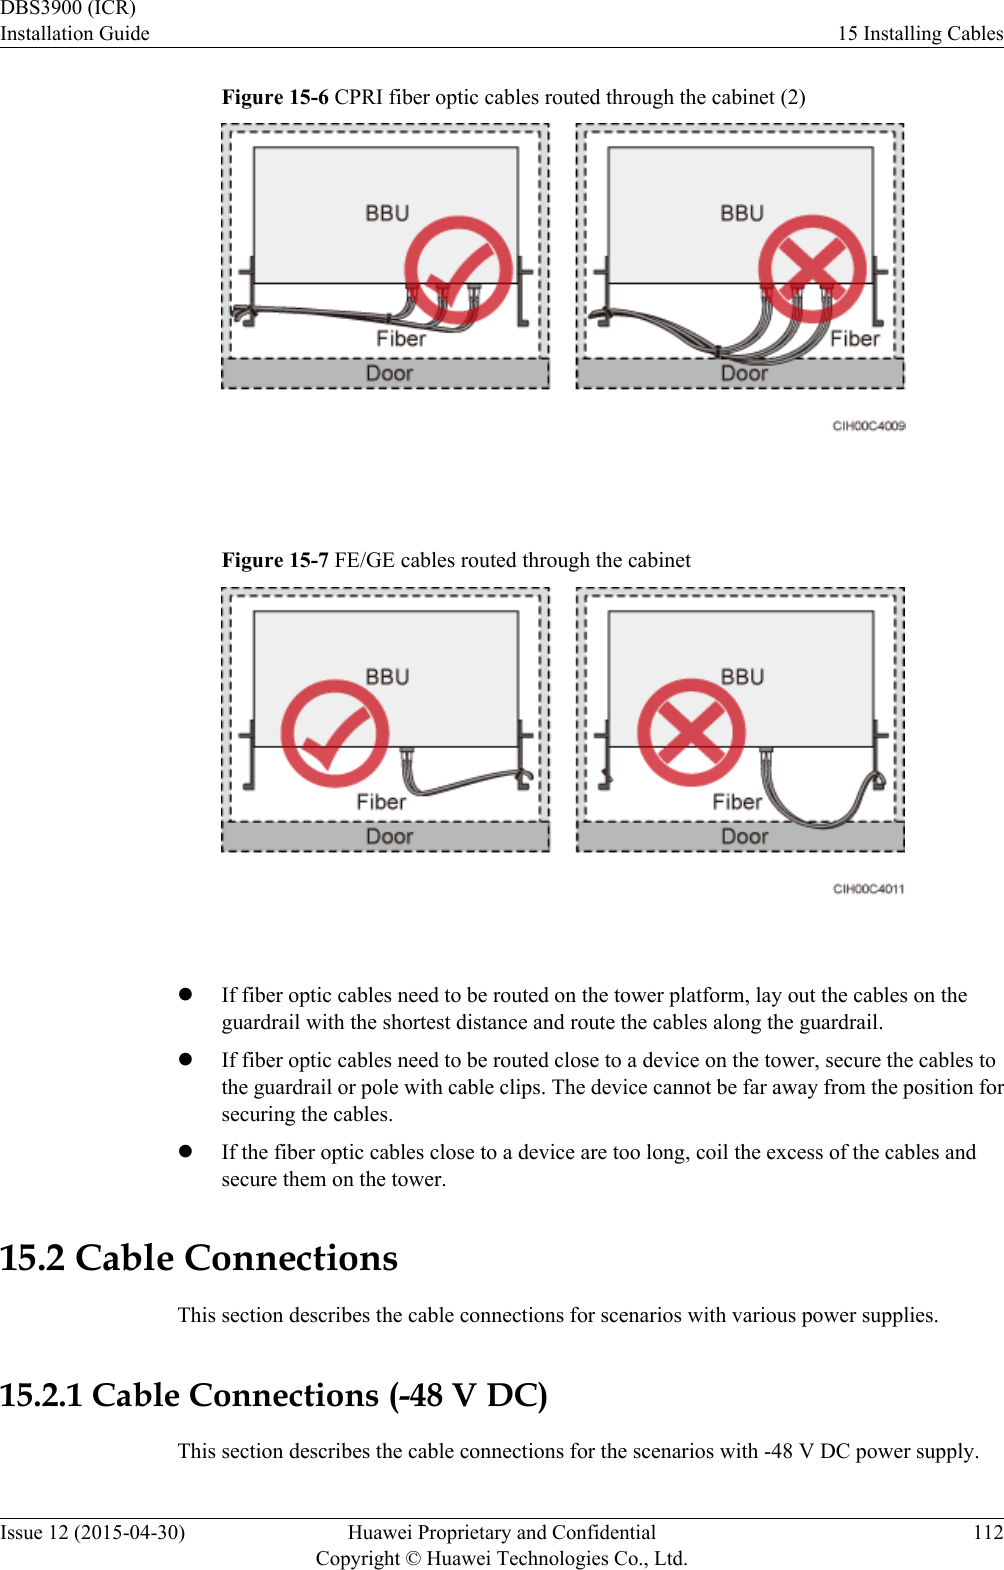 Figure 15-6 CPRI fiber optic cables routed through the cabinet (2) Figure 15-7 FE/GE cables routed through the cabinet lIf fiber optic cables need to be routed on the tower platform, lay out the cables on theguardrail with the shortest distance and route the cables along the guardrail.lIf fiber optic cables need to be routed close to a device on the tower, secure the cables tothe guardrail or pole with cable clips. The device cannot be far away from the position forsecuring the cables.lIf the fiber optic cables close to a device are too long, coil the excess of the cables andsecure them on the tower.15.2 Cable ConnectionsThis section describes the cable connections for scenarios with various power supplies.15.2.1 Cable Connections (-48 V DC)This section describes the cable connections for the scenarios with -48 V DC power supply.DBS3900 (ICR)Installation Guide 15 Installing CablesIssue 12 (2015-04-30) Huawei Proprietary and ConfidentialCopyright © Huawei Technologies Co., Ltd.112